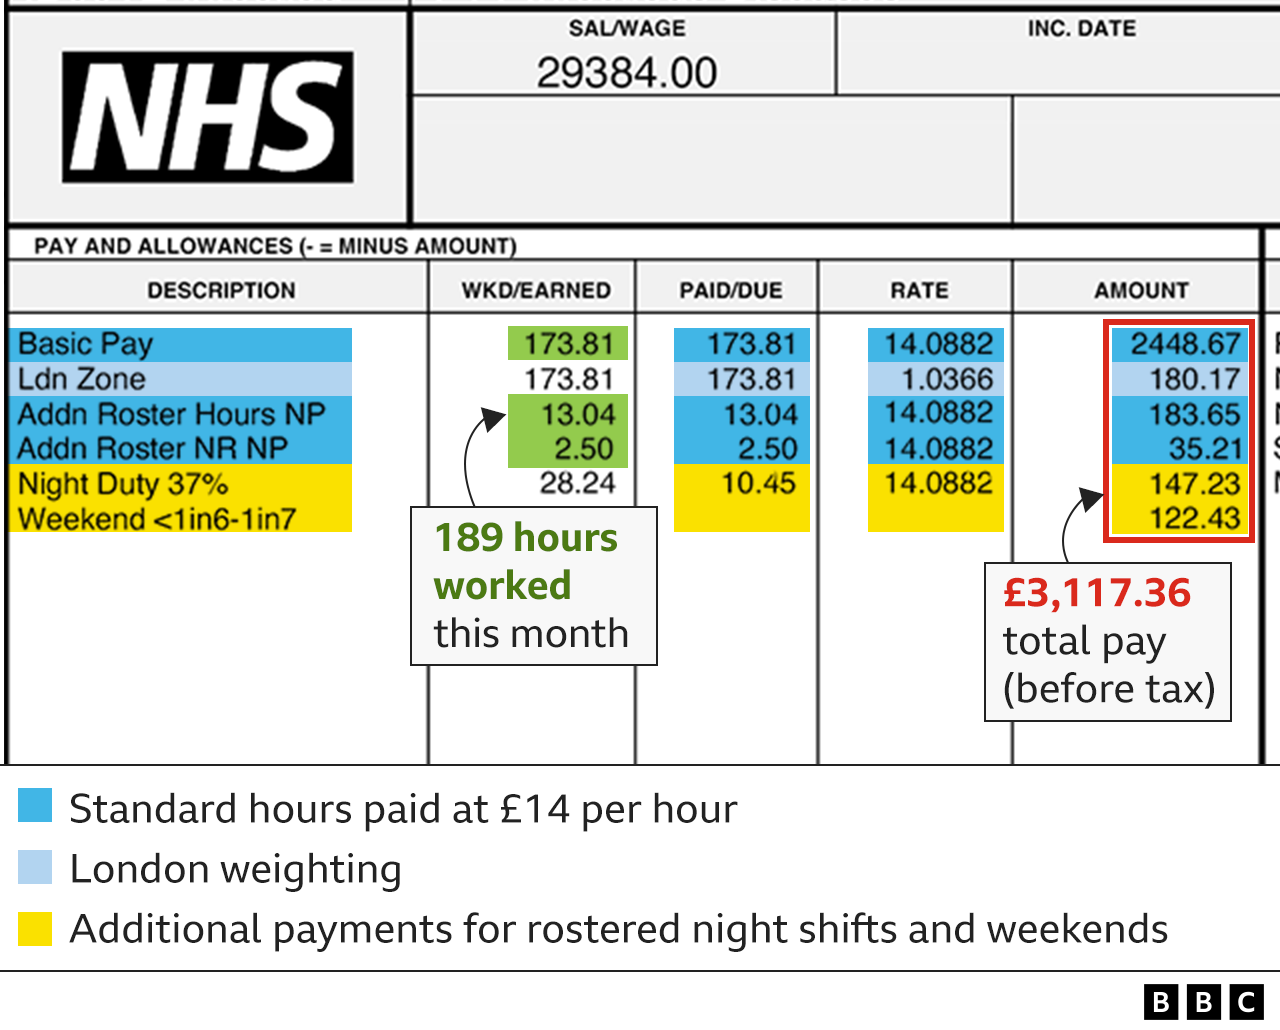 Wage slip for monthly payments and allowances, showing showing basic pay at £14.09 per hour and London weighting at £1.04 per hour, plus additional payments for night shifts as an extra 37% of basic pay and weekend work as a flat payment of £122.43 per month. The total number of hours worked was 189.35 hours and the total pay before tax was £3,117.36.